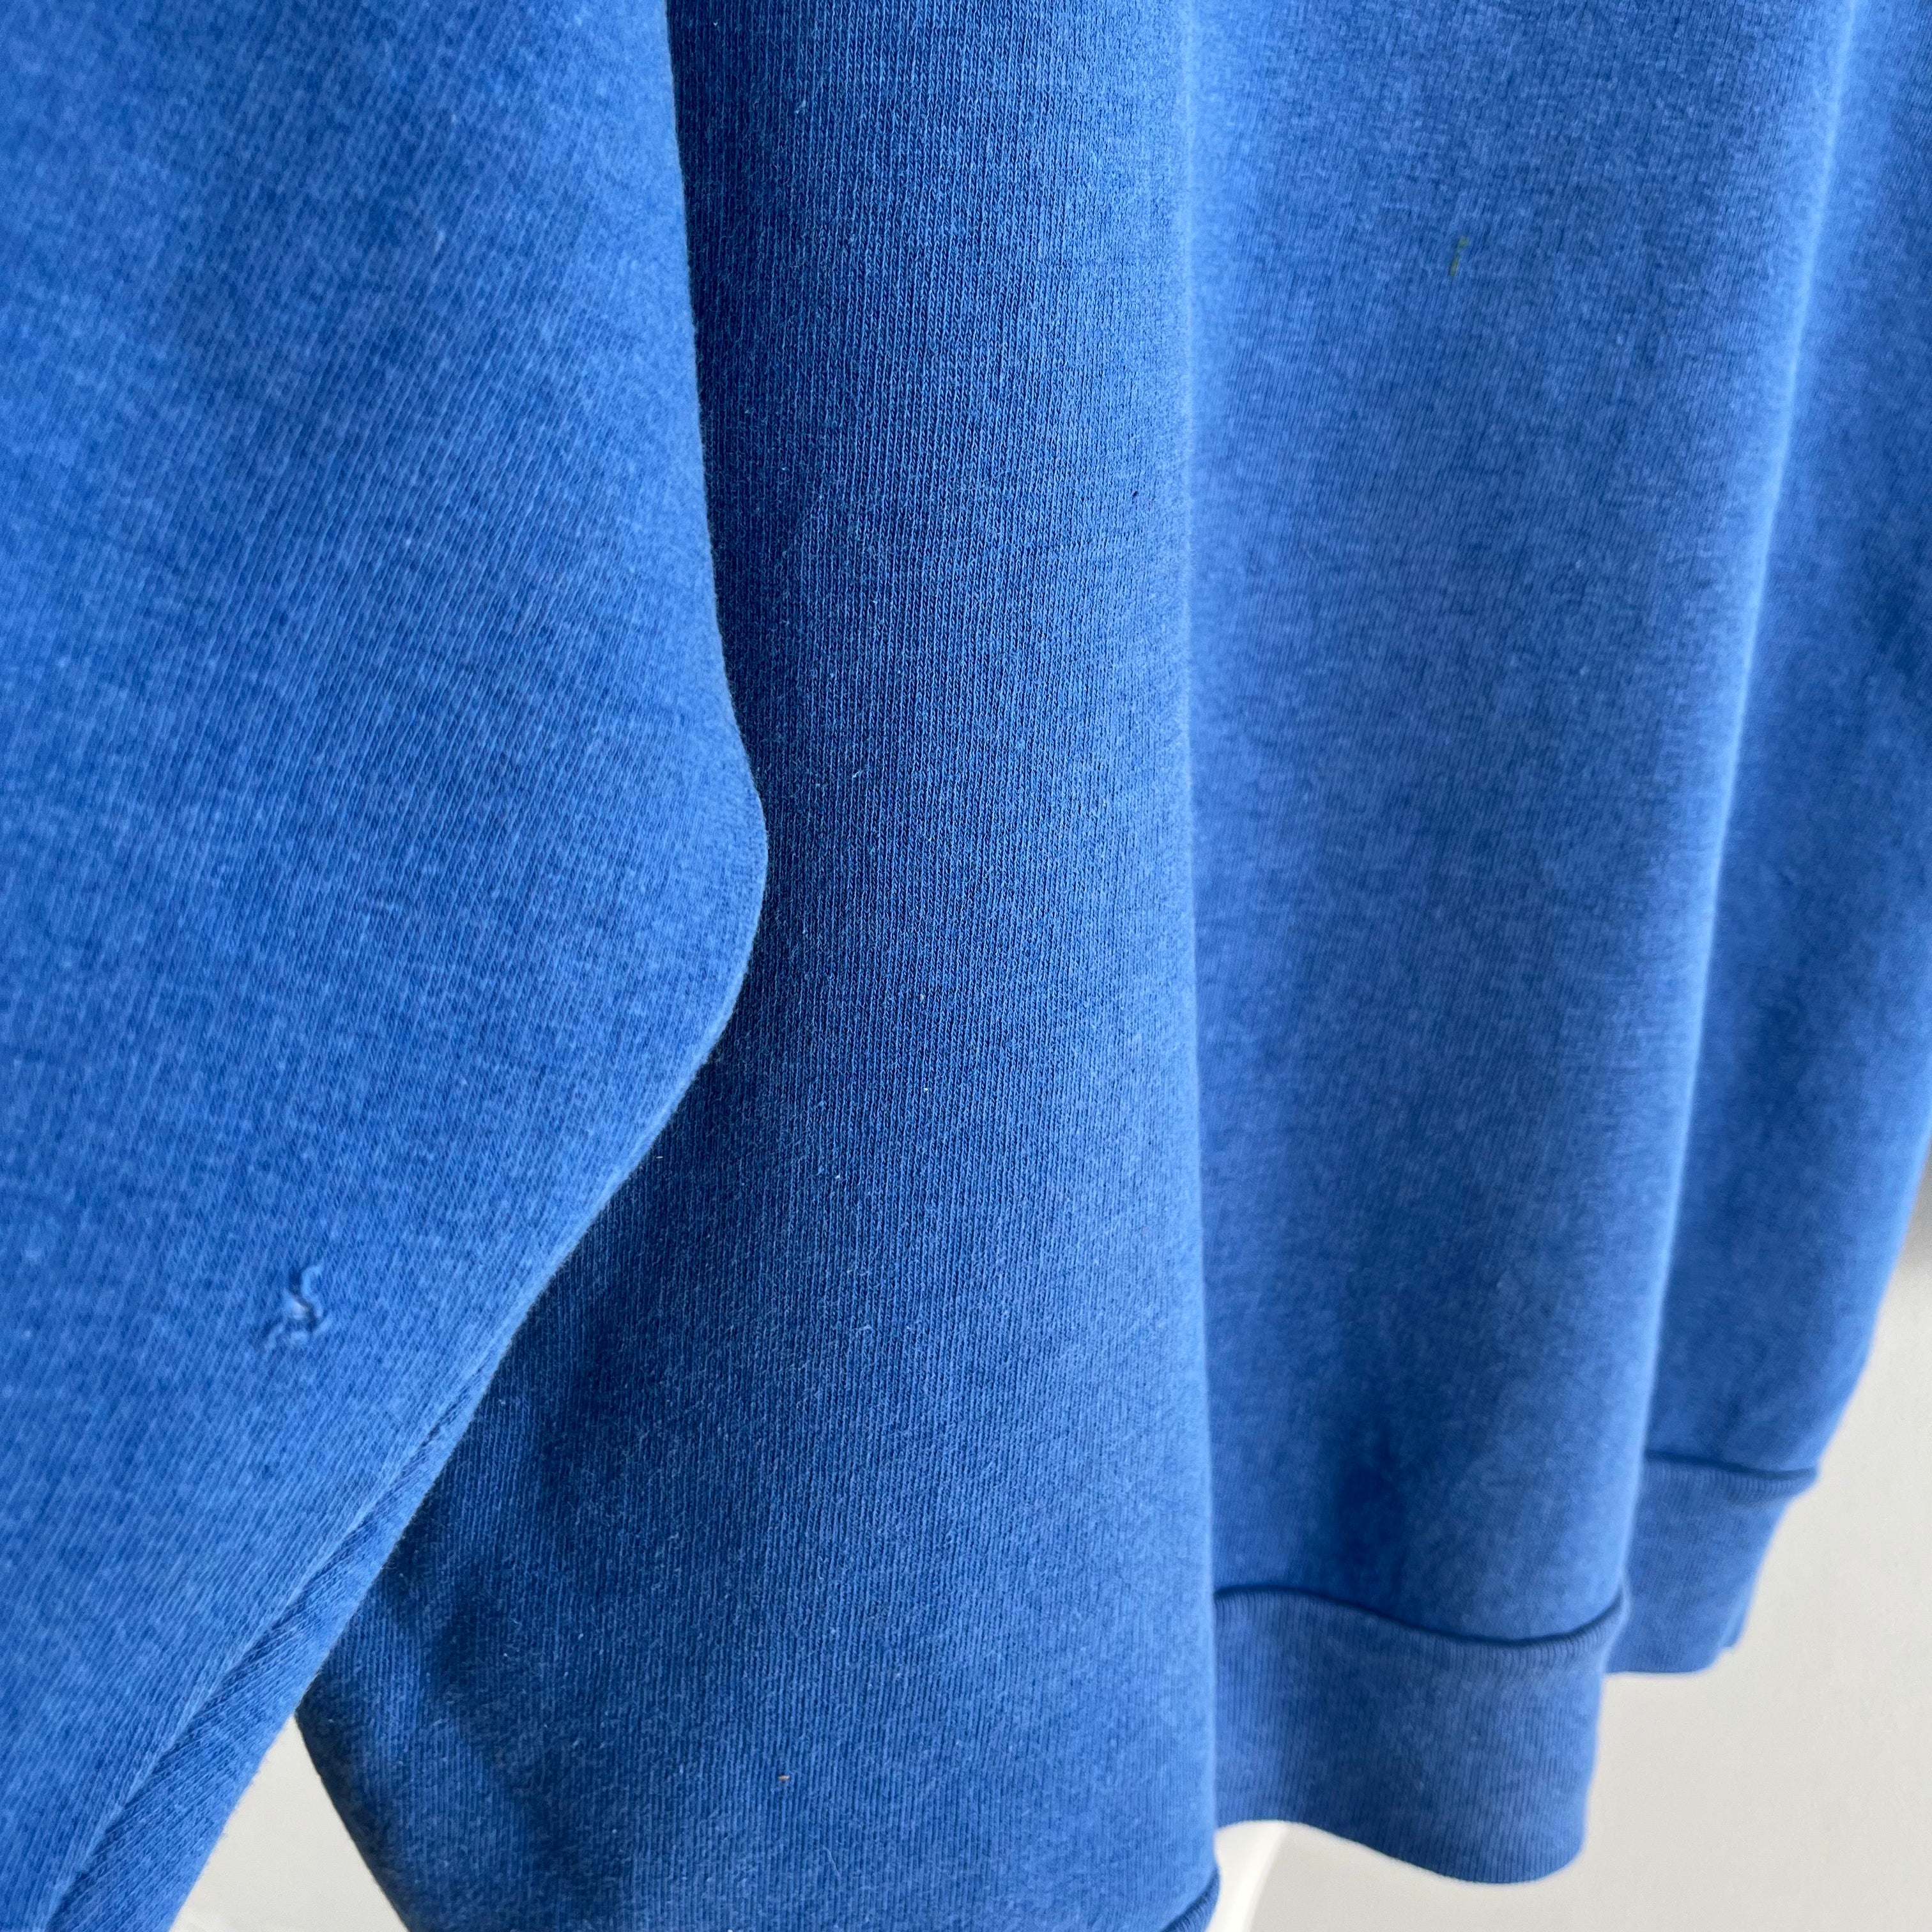 1970s Cotton Perfectly Faded Blue Luxurious Sweatshirt (IMO)